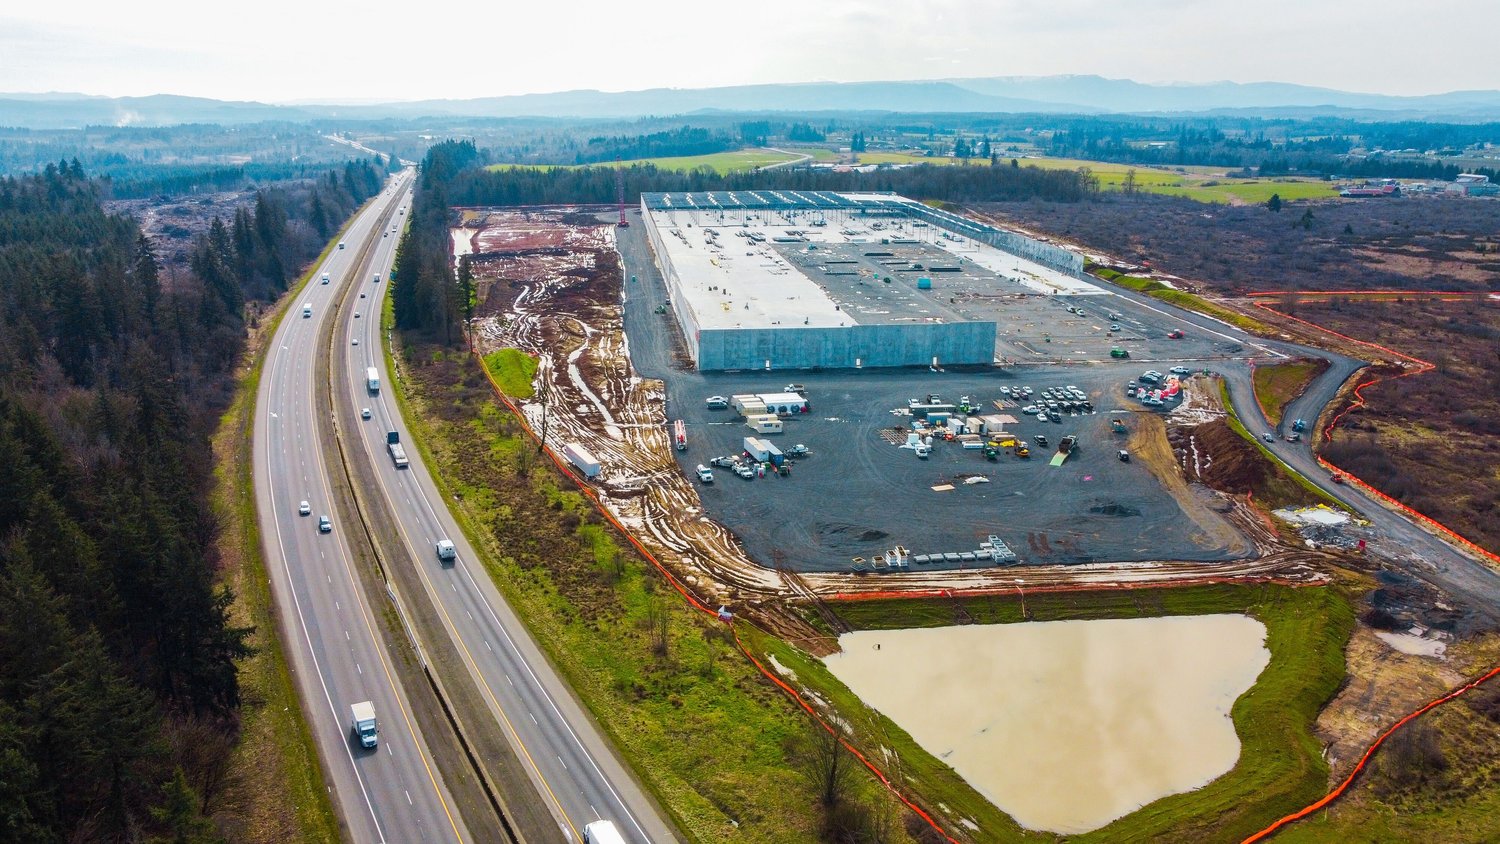 Winlock has been identified as a major growth opportunity in the county, with its industrial park slated to host a Lowe’s distribution facility, seen under construction here.